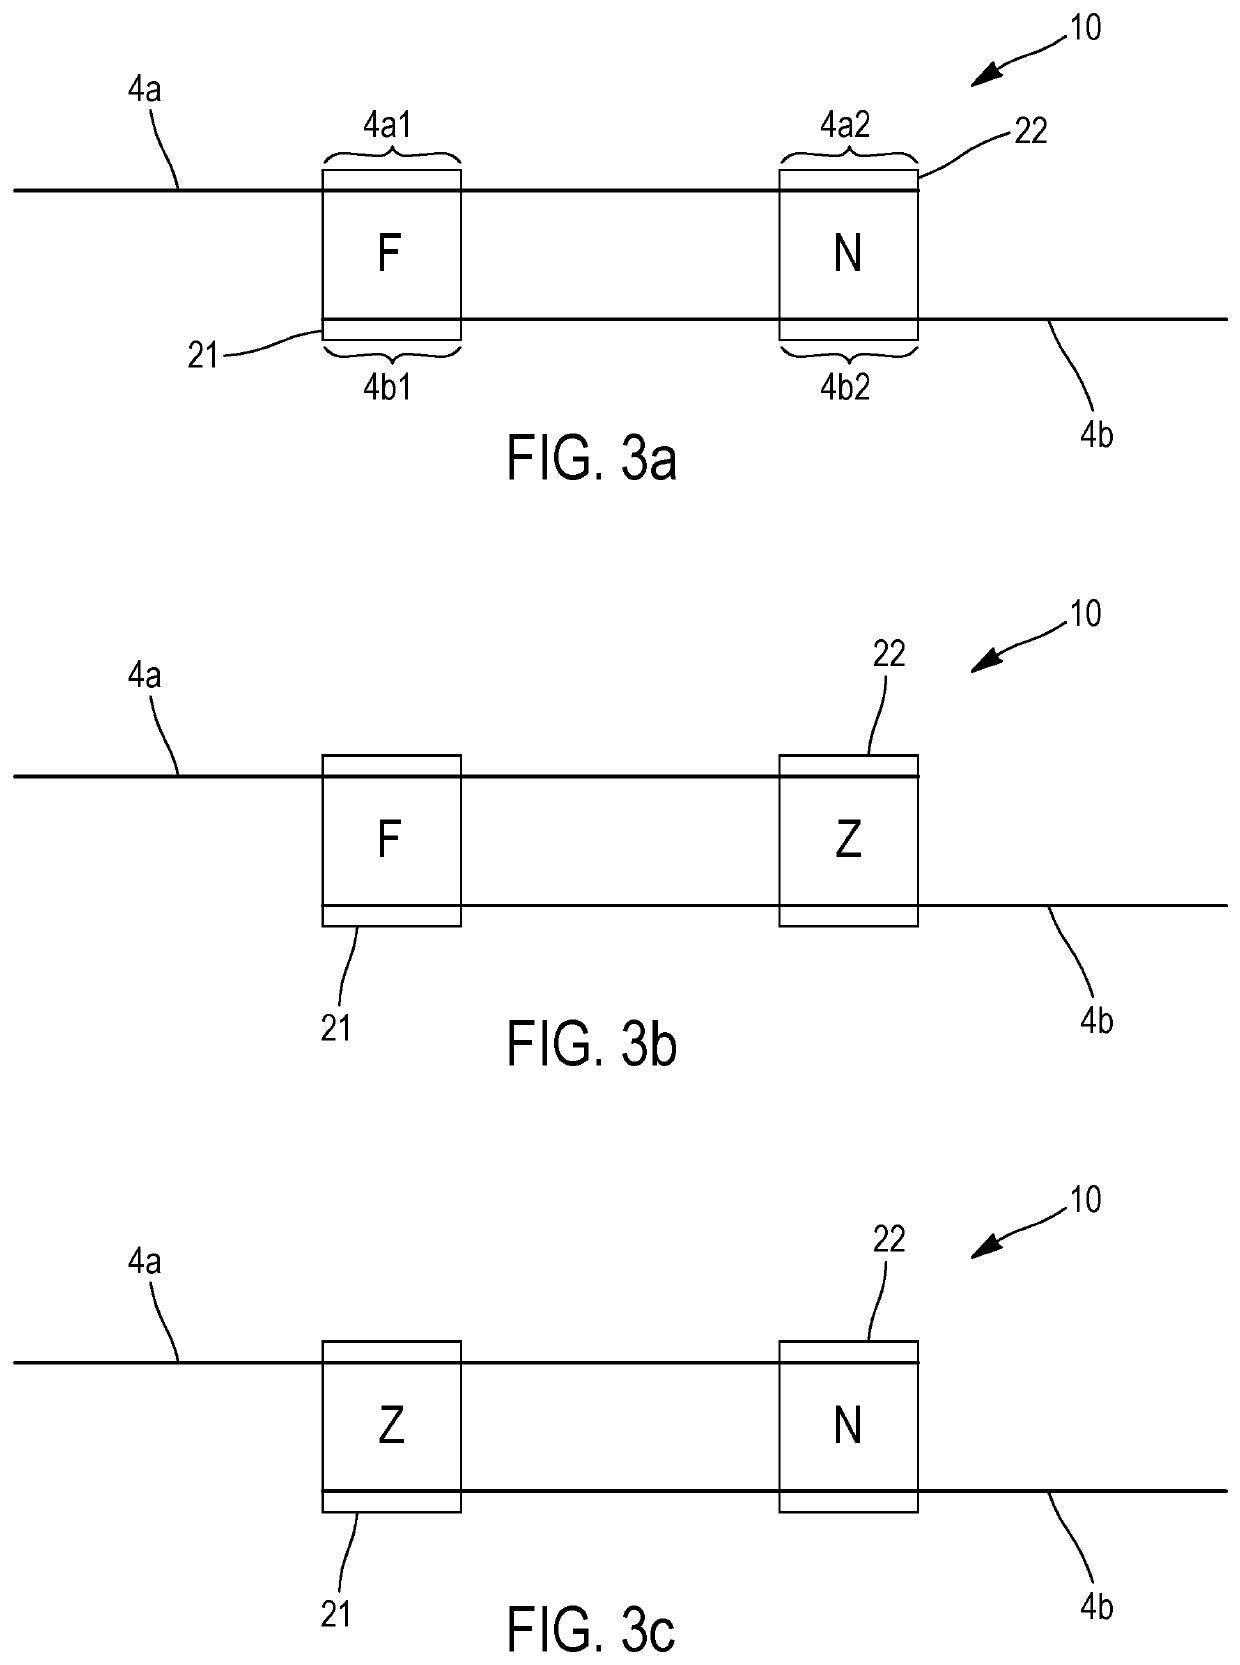 Radiofrequency transmission/reception device